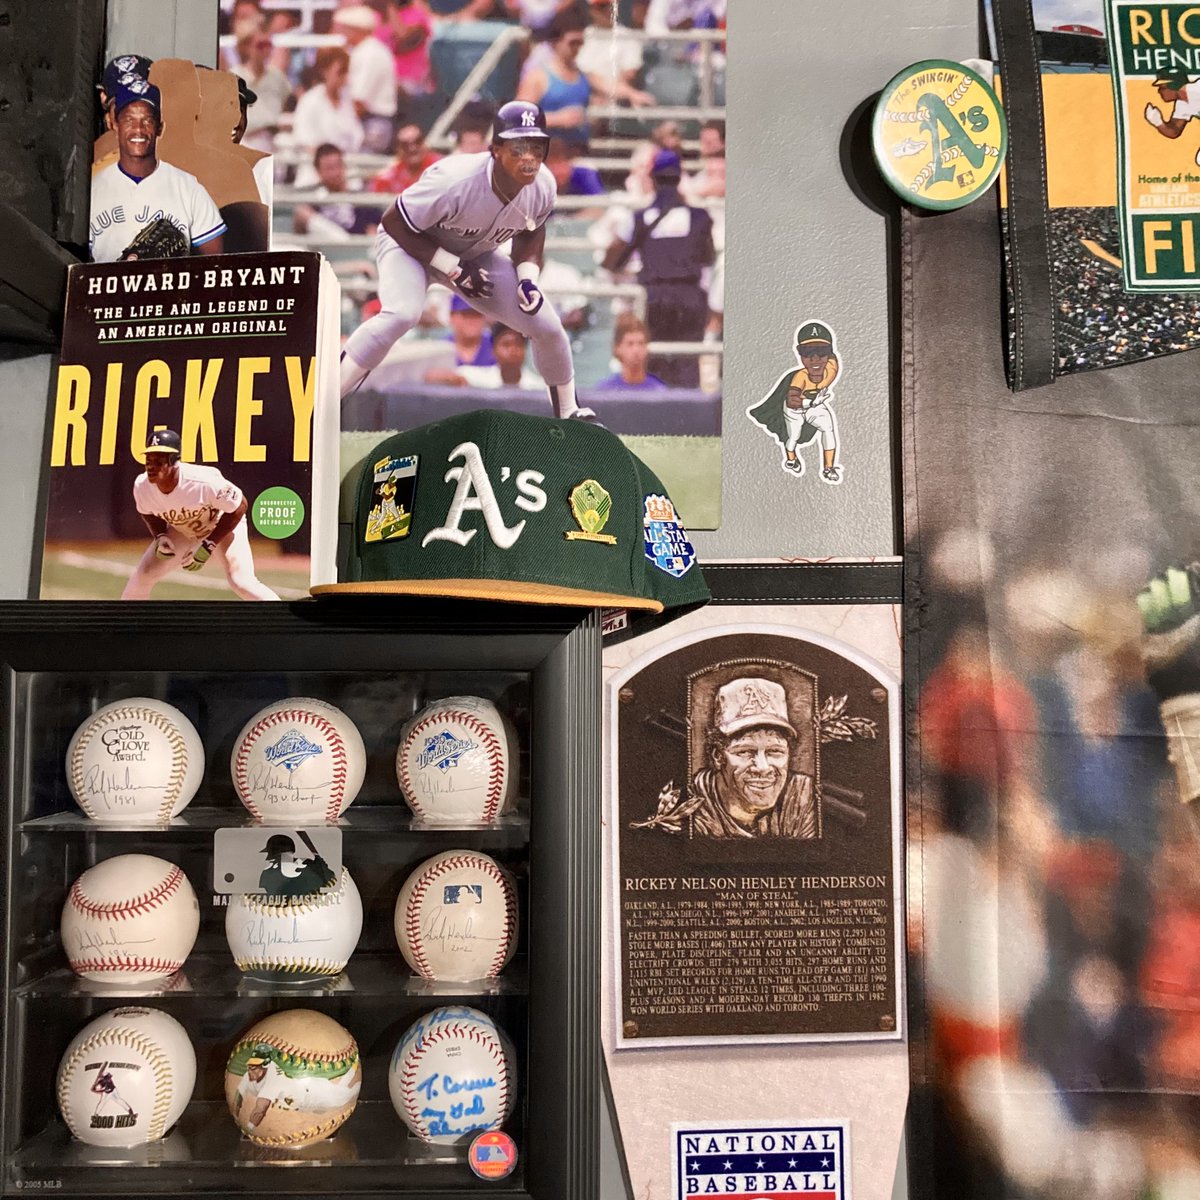 Todays Rickey Henderson PC swag is this current view within the “Man-cave of Steal” that captures bling from baseballs, pins, hats, pennants and more. Can you guess how many @MLB teams are represented in this one image? @CardPurchaser 🔥💚👀🐐⚾️🏃🏿💨🧤#rickeyhenderson #thehobby